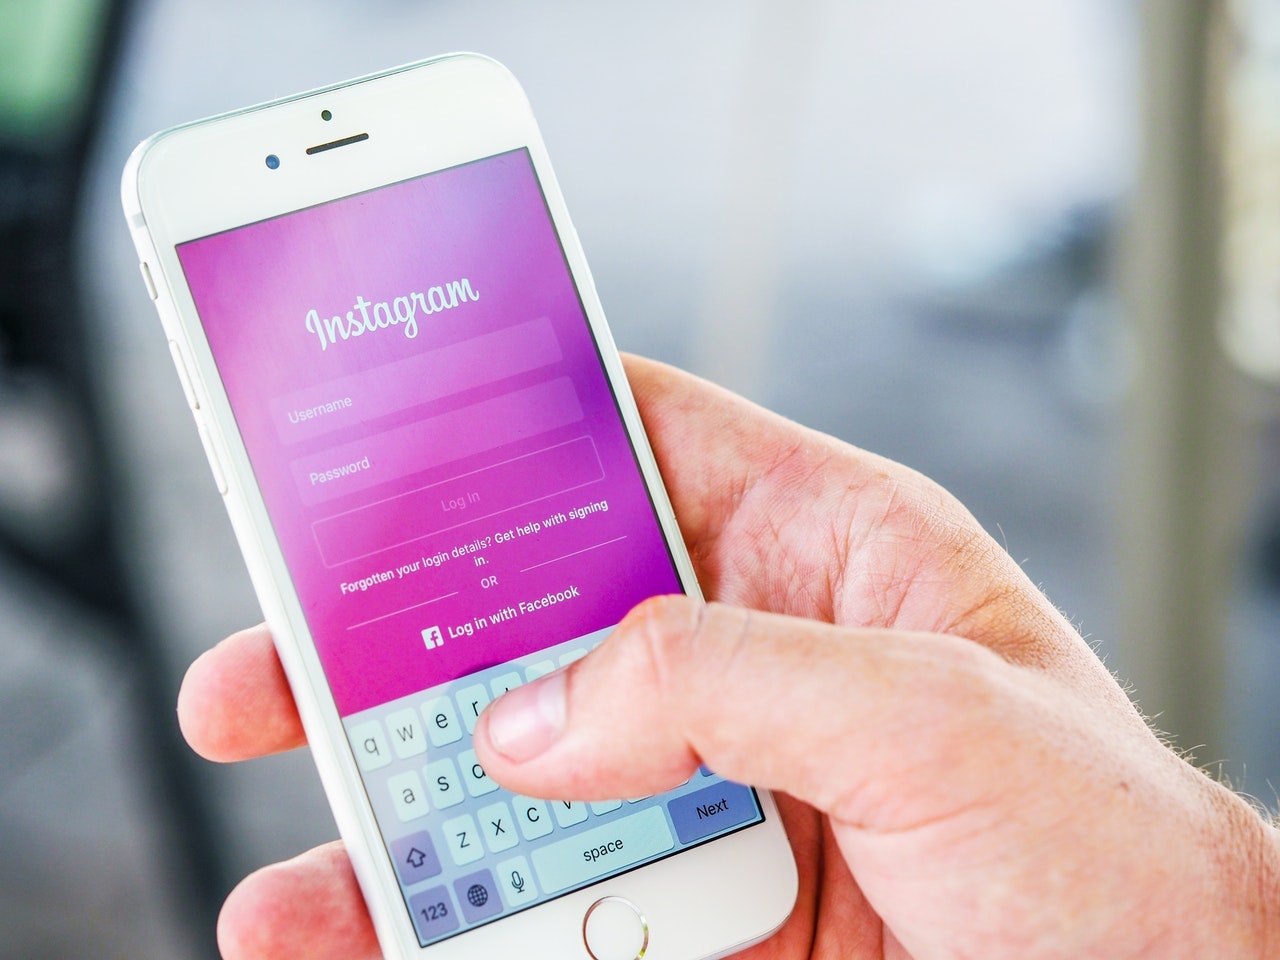 A hand holding an iphone with the Instagram login page displayed